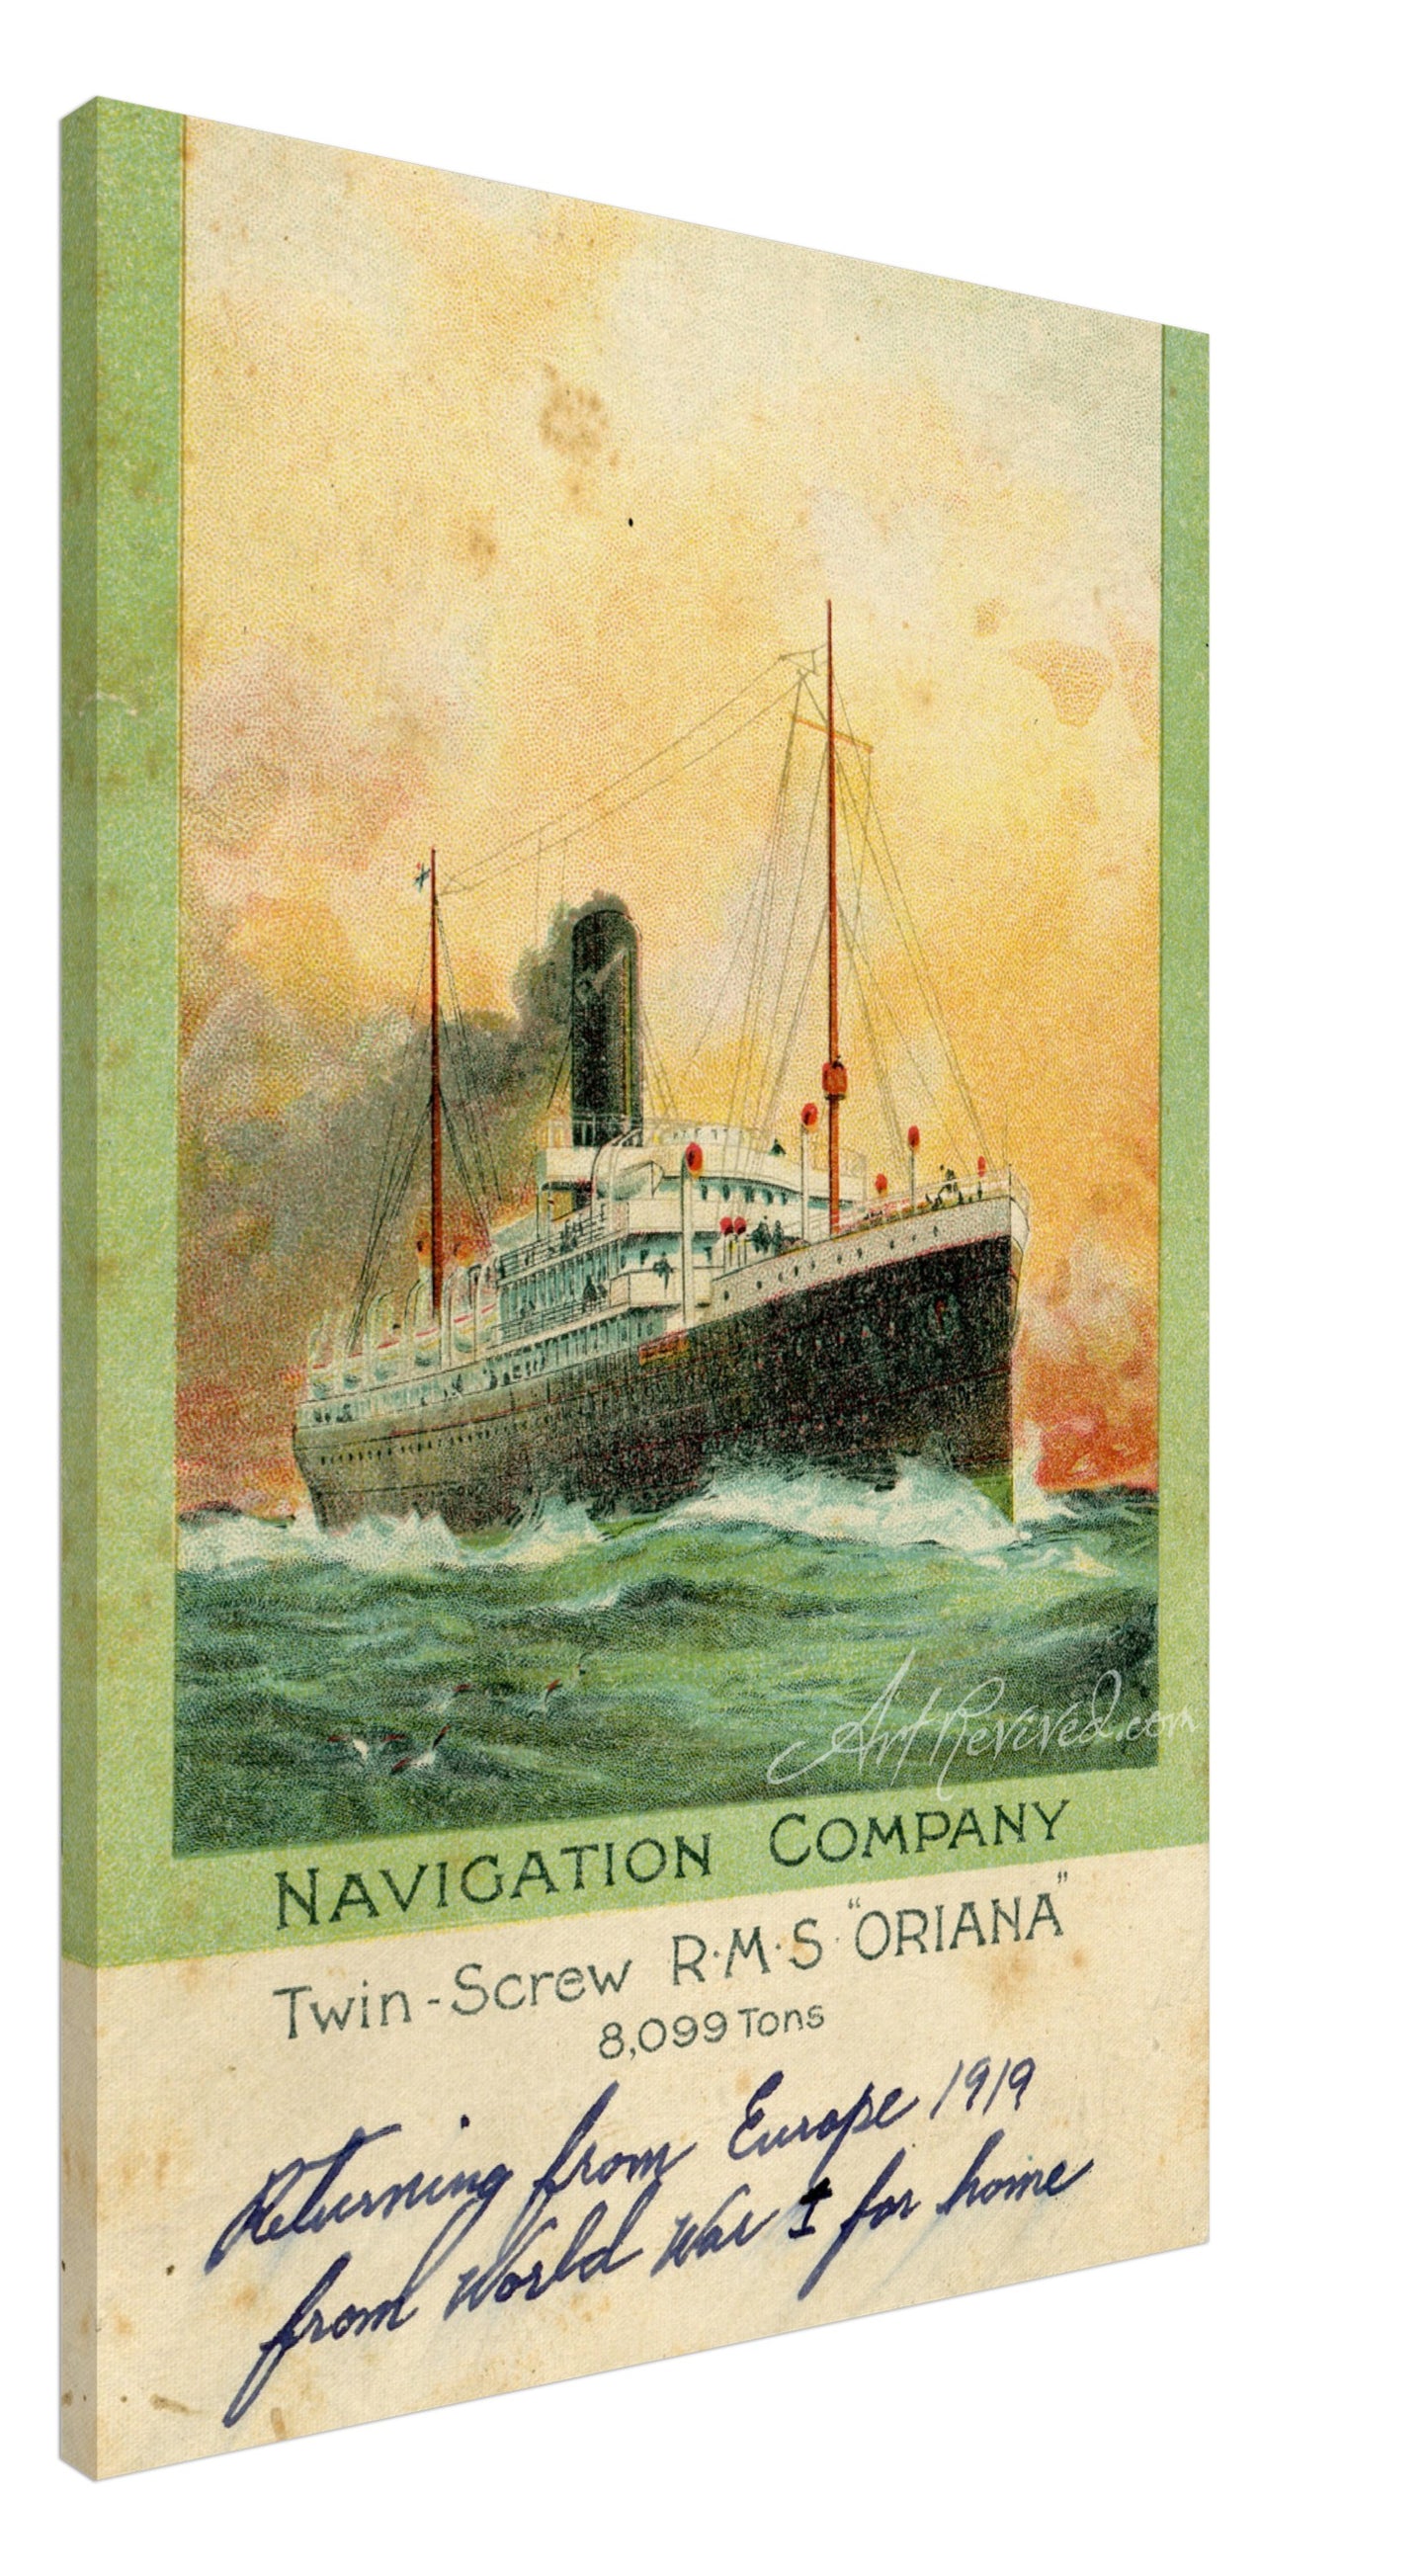 The Pacific Steam Navigation Co. "RMS Oriana"